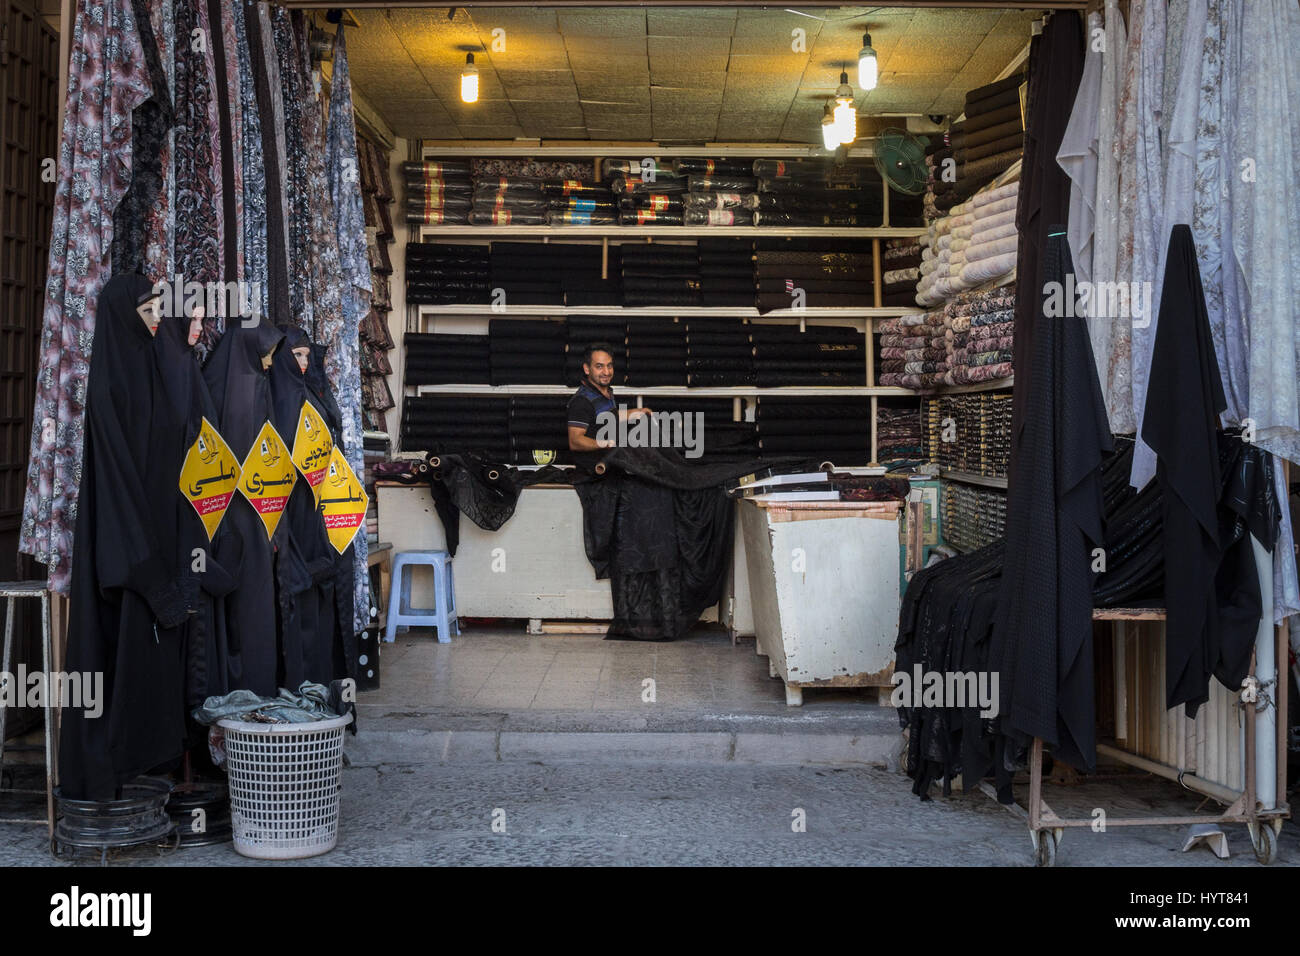 ISFAHAN, IRAN - AUGUST 20, 2016: Islamic outfit seller (hijab, veils and scarfs in Isfahan bazaar  Picture of a islamic clothing seller in Isfahan, Ir Stock Photo